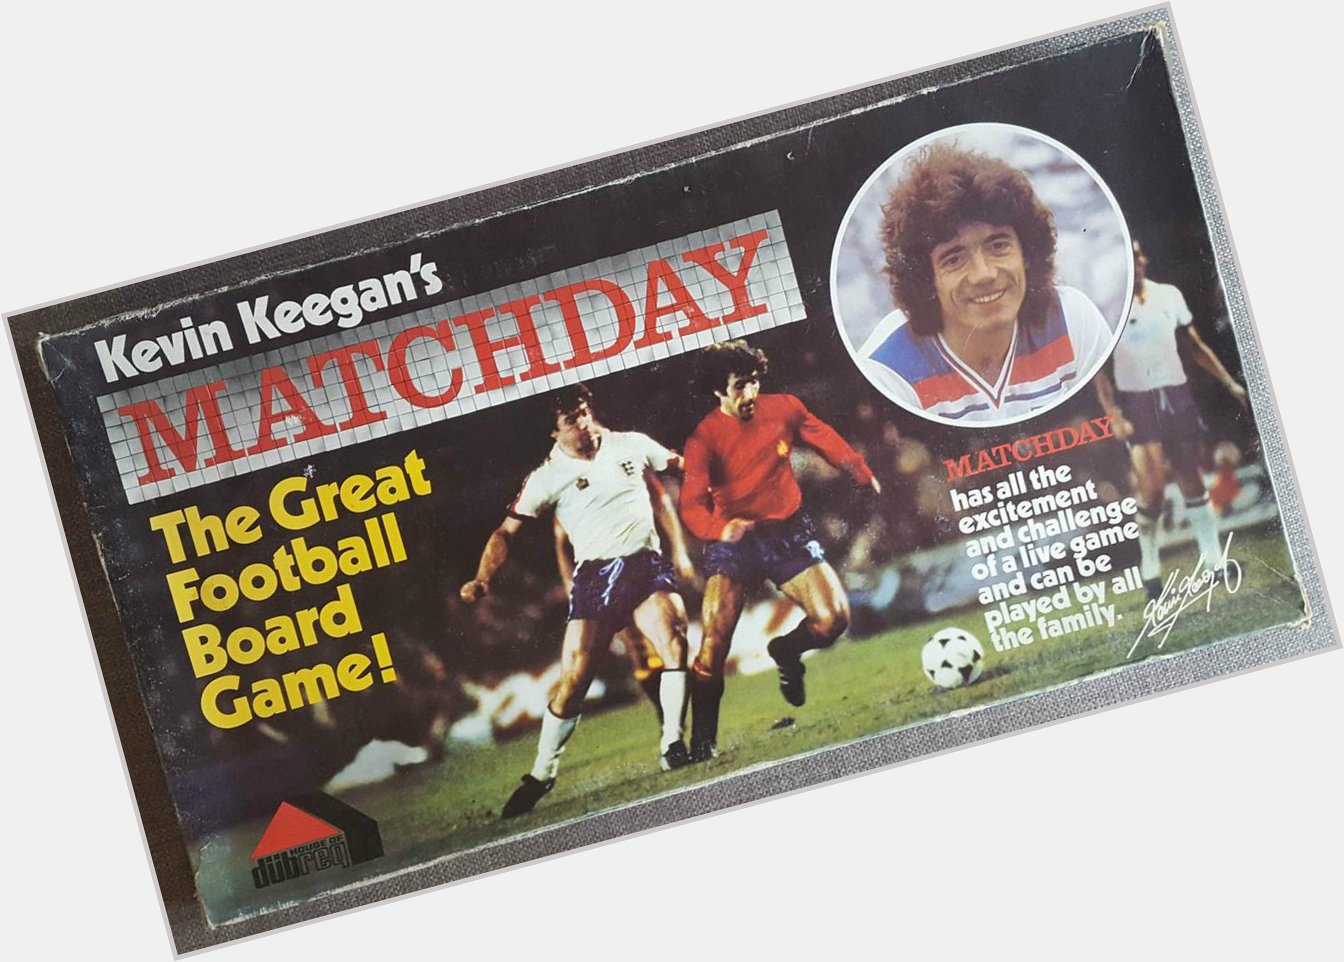 Happy birthday to one of Yorkshire\s greatest ever sportsmen (and perms), Kevin Keegan! 